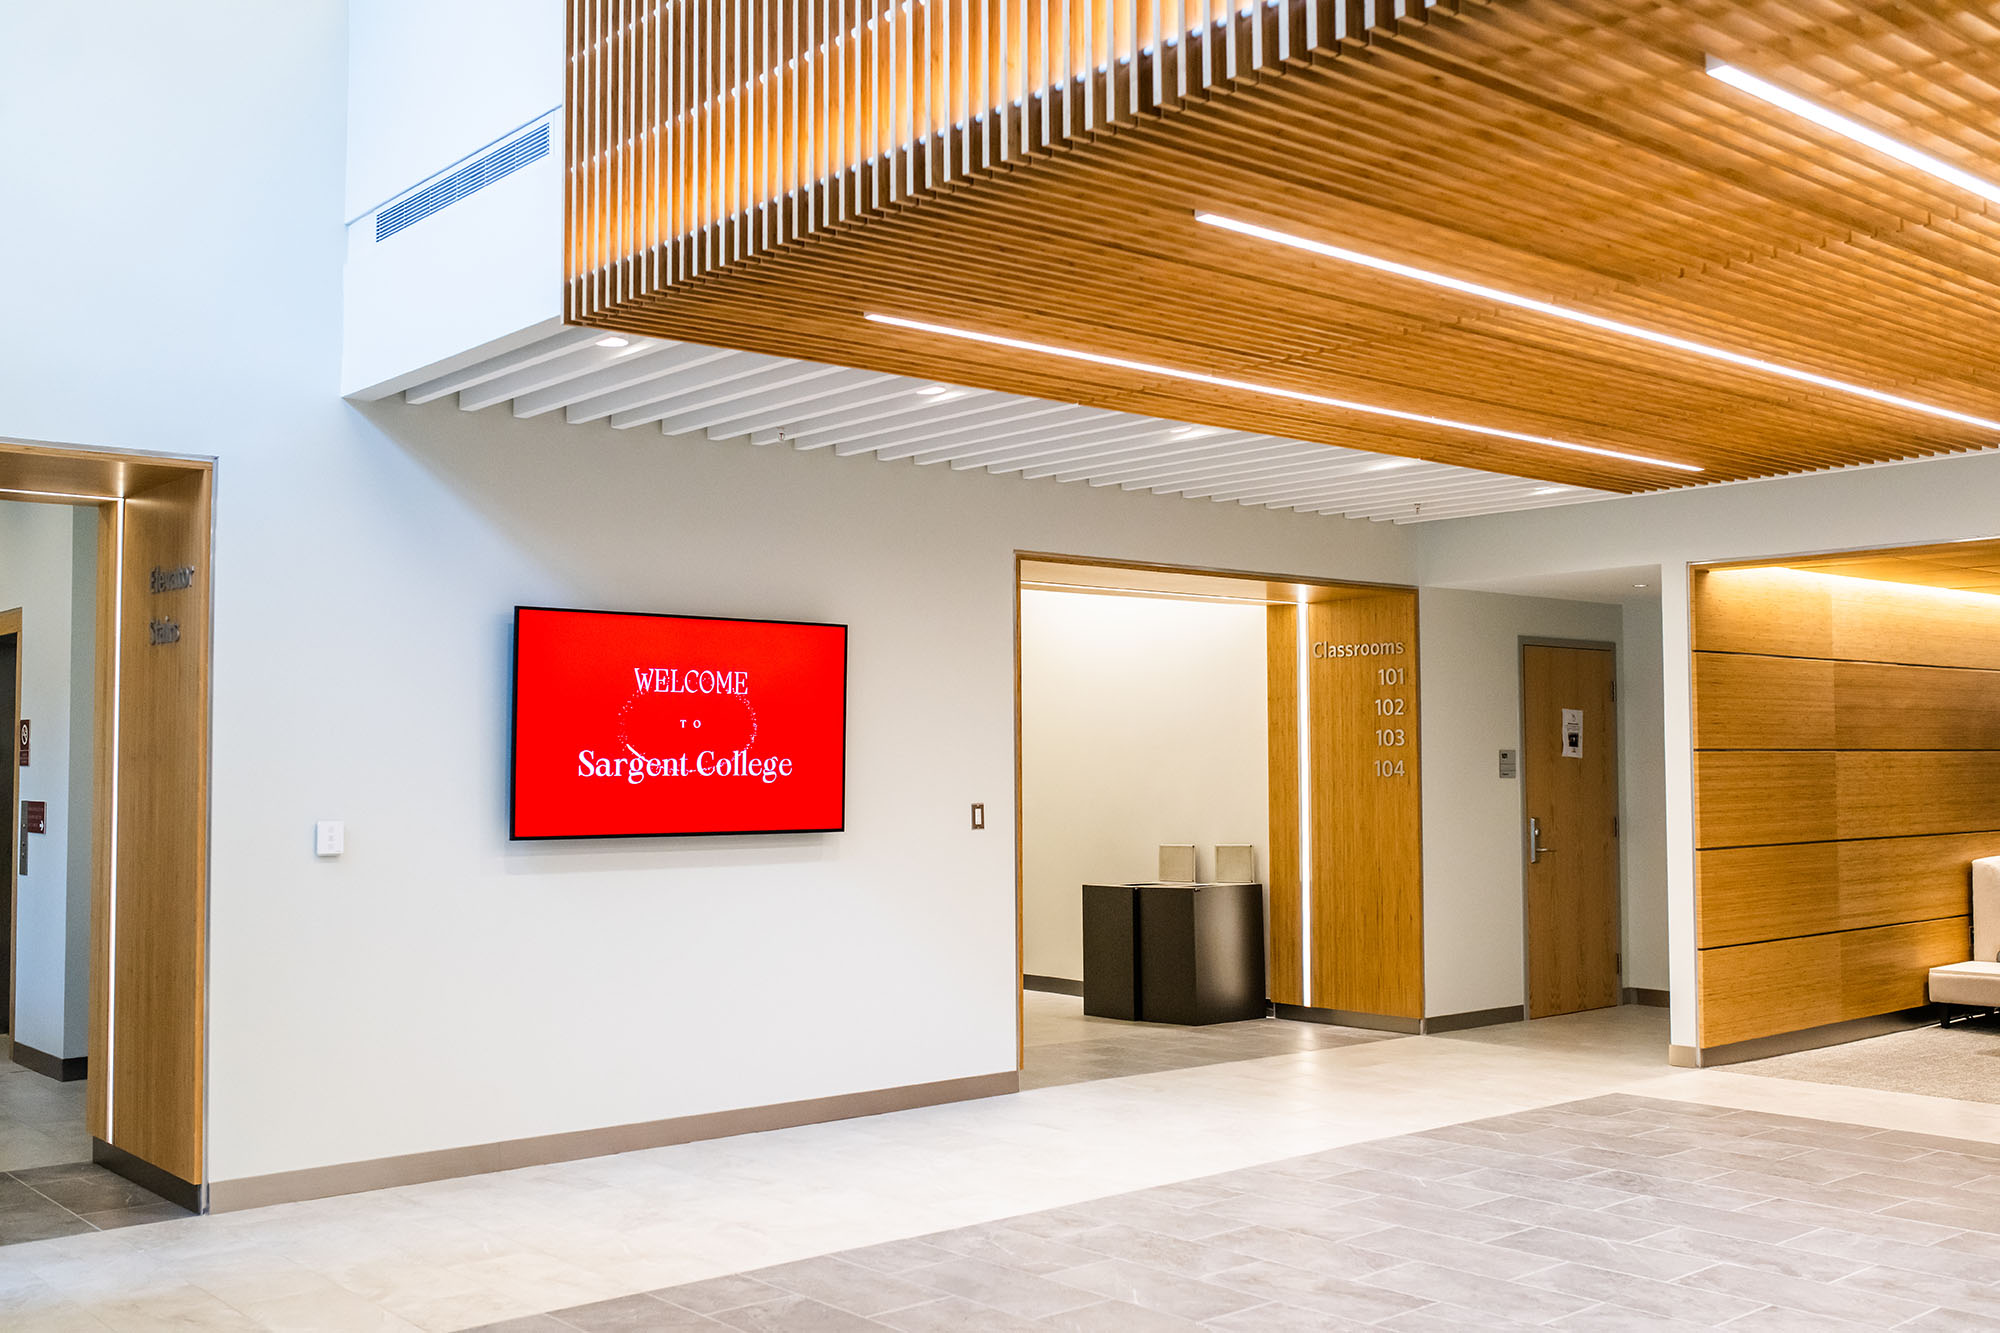 Photo: A bright, modern room with wooden accents is shown. A screen on the wall has a red display that reads in white text "Welcome to Sargent College".